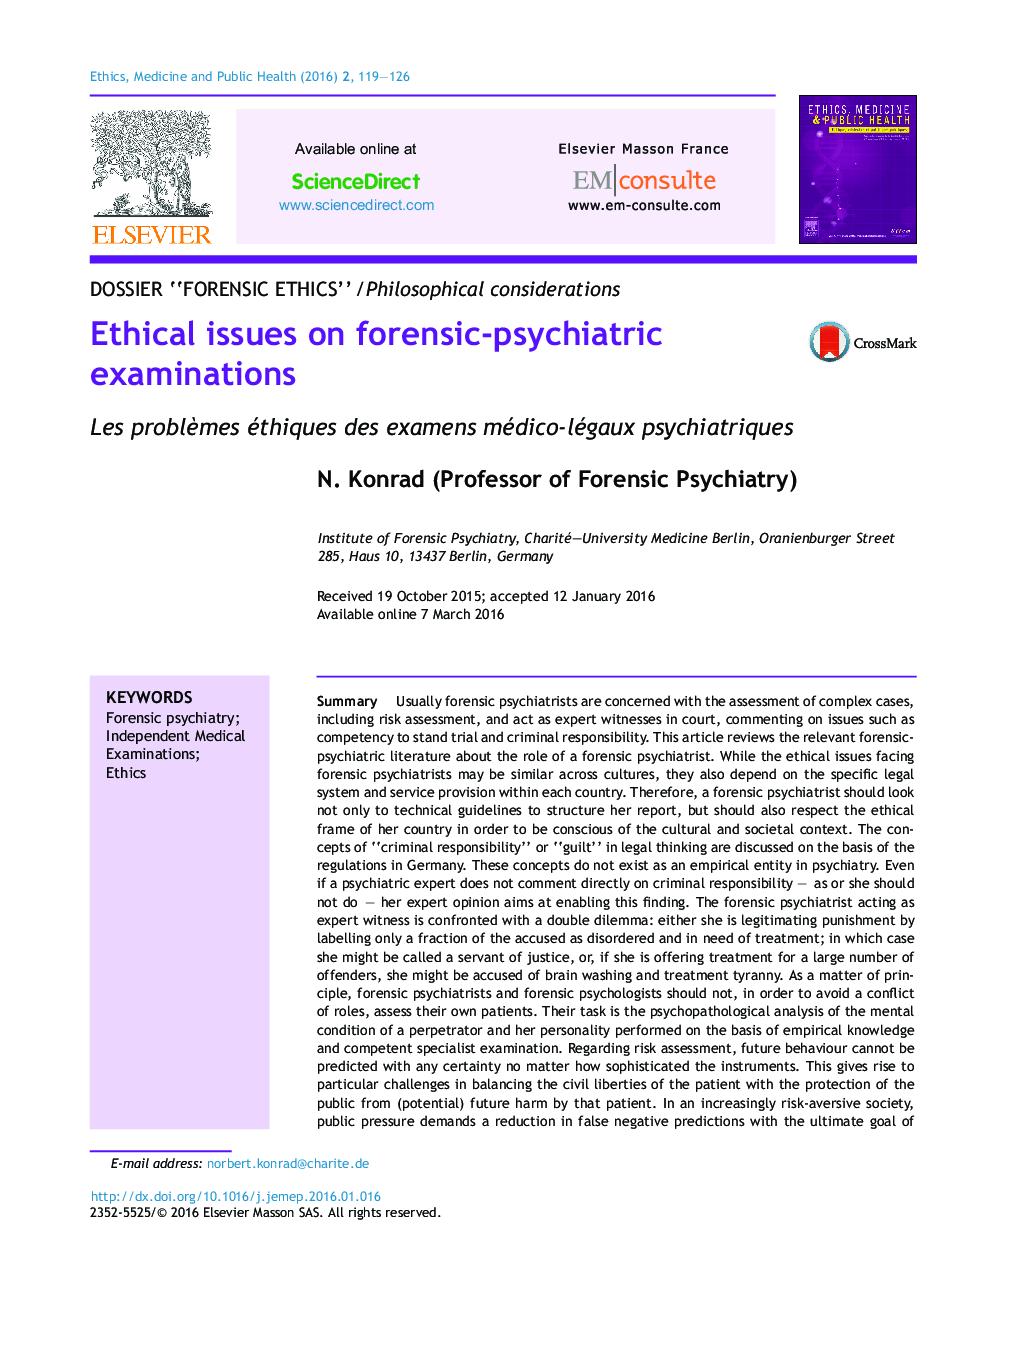 Ethical issues on forensic-psychiatric examinations